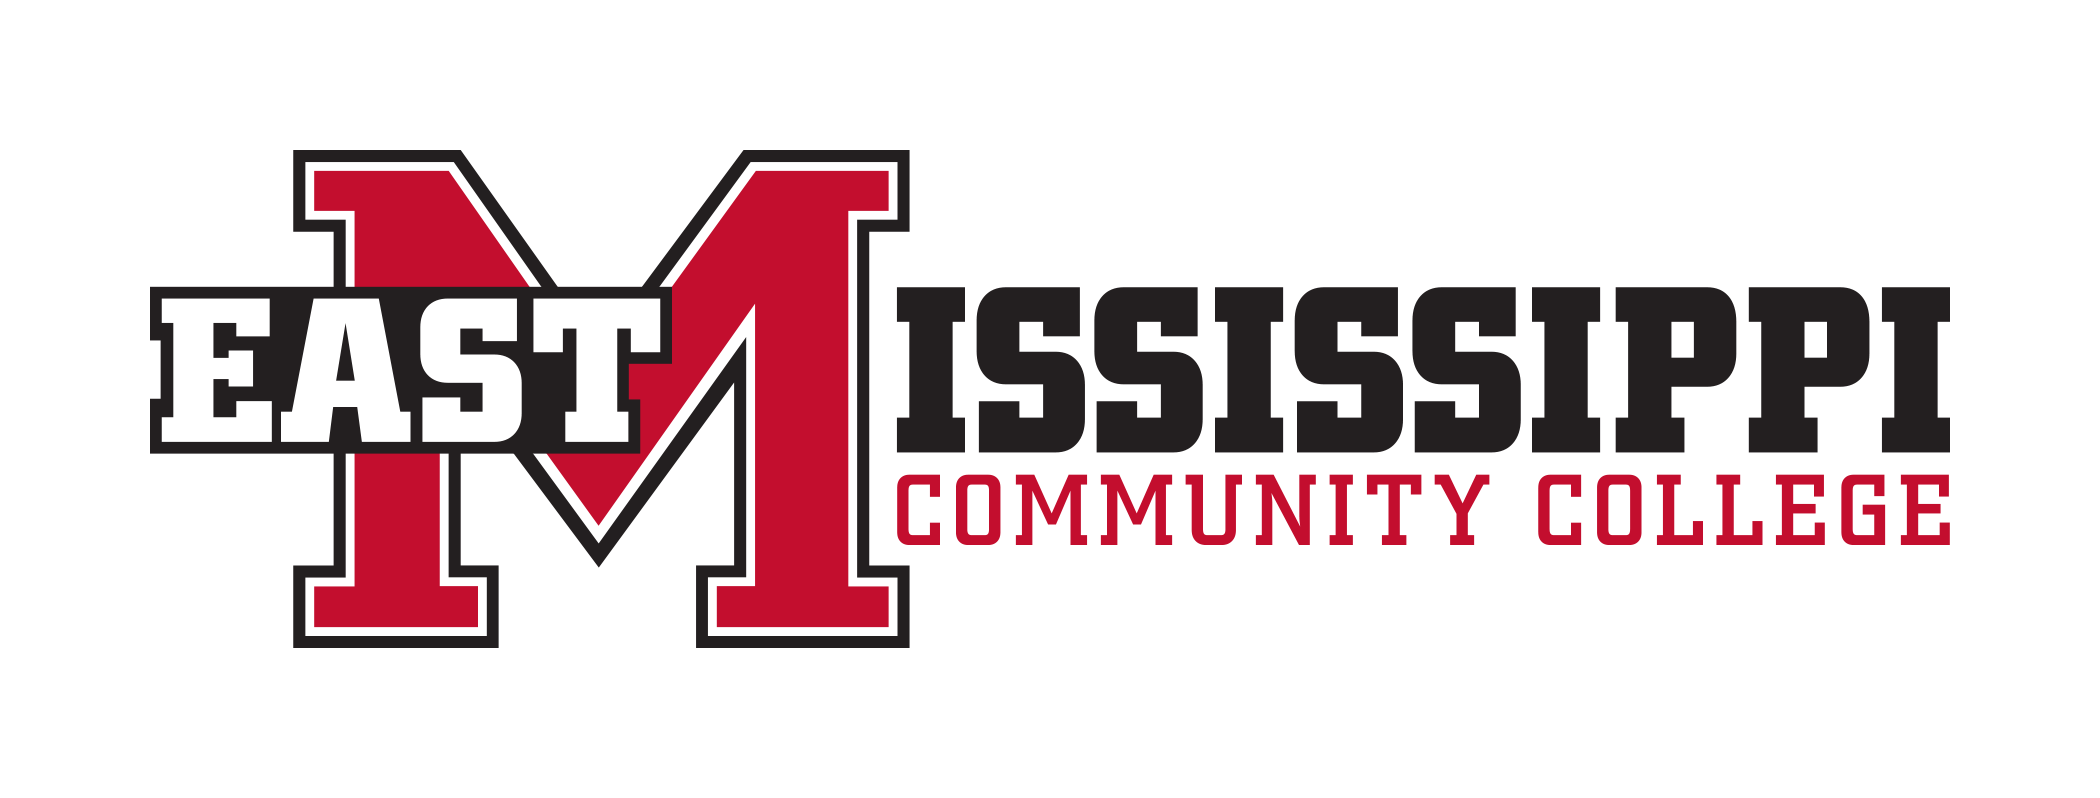 East Mississippi Community College - Wikipedia